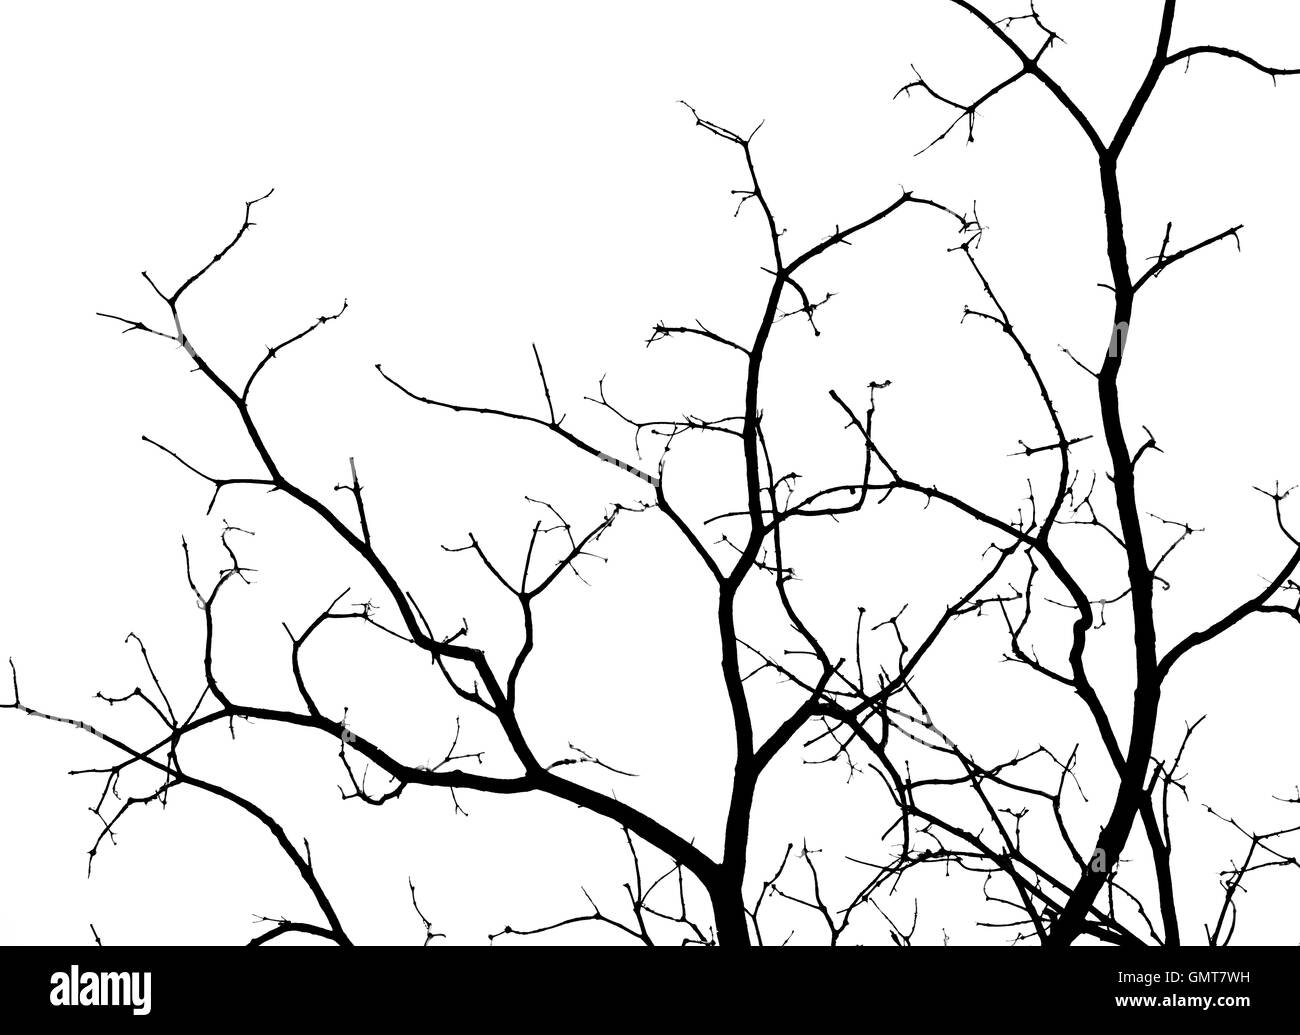 Branches Black and White Stock Photos & Images - Alamy